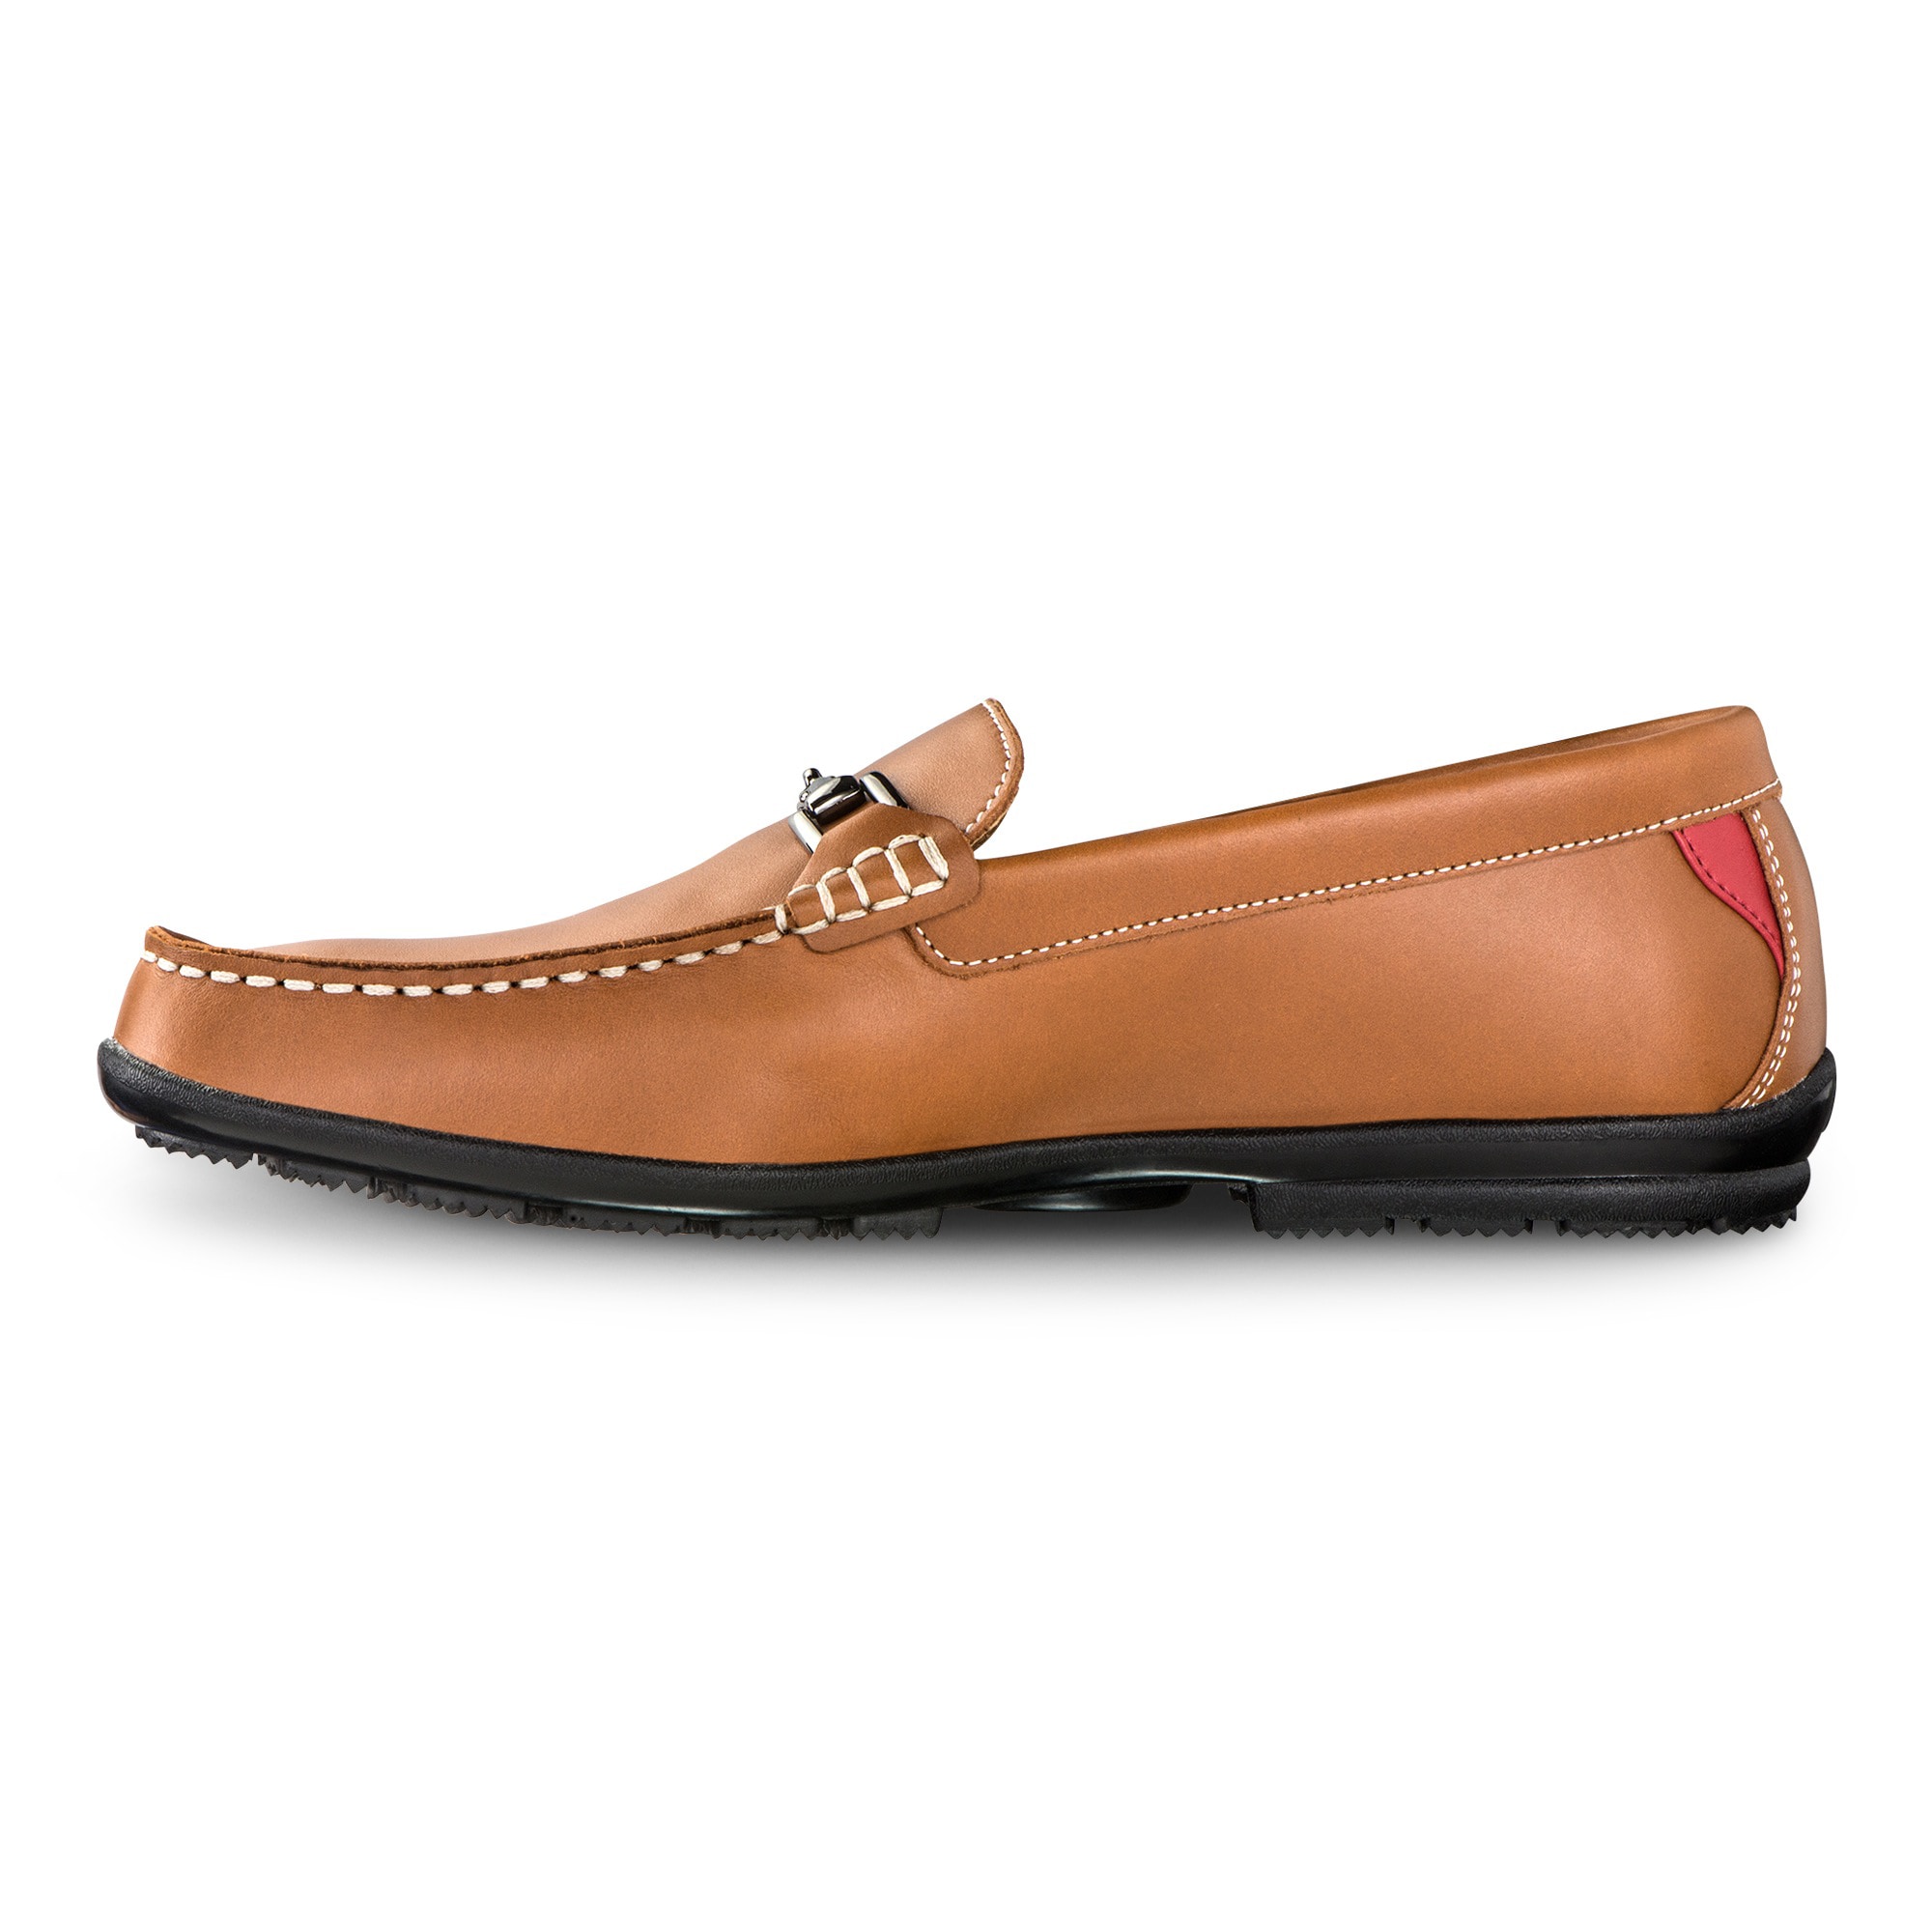 club casuals buckle loafer